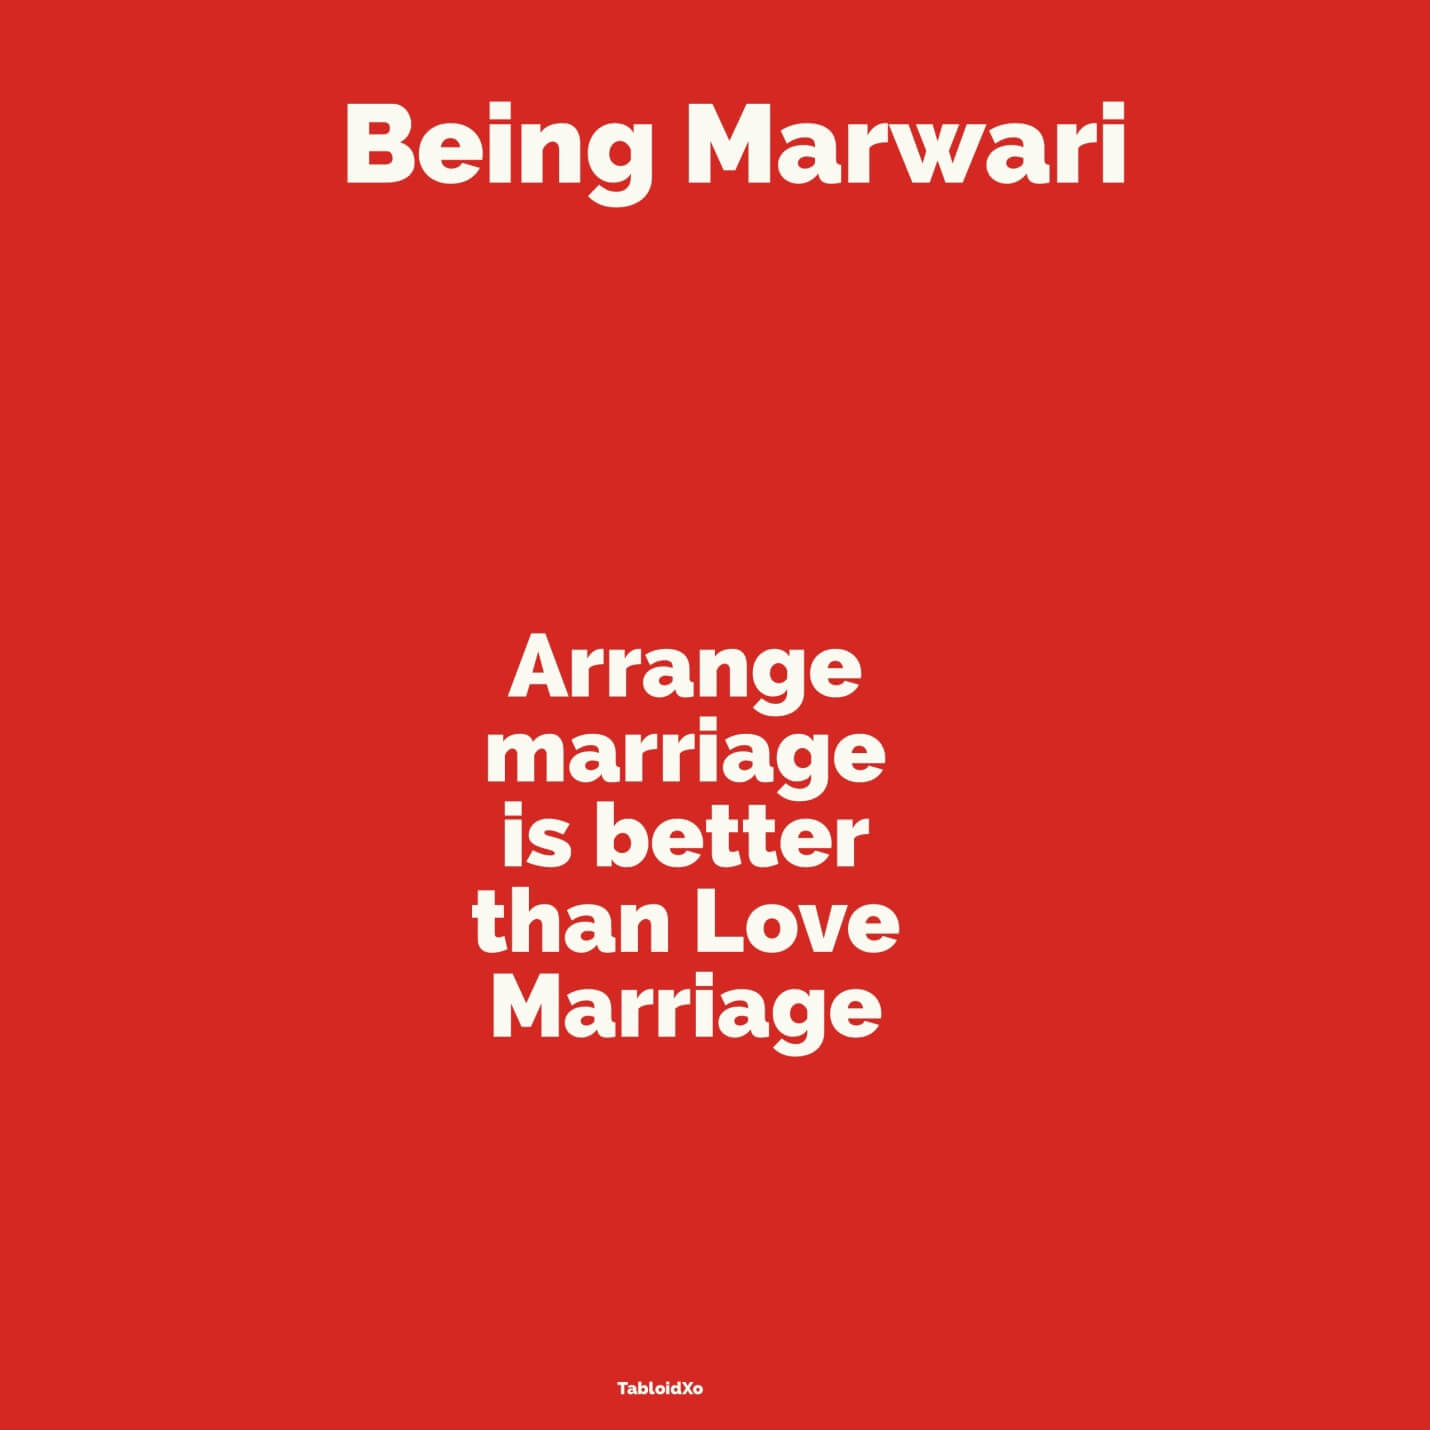 10 Funny Things You Face Being Born And Brought Up In A Marwari Family